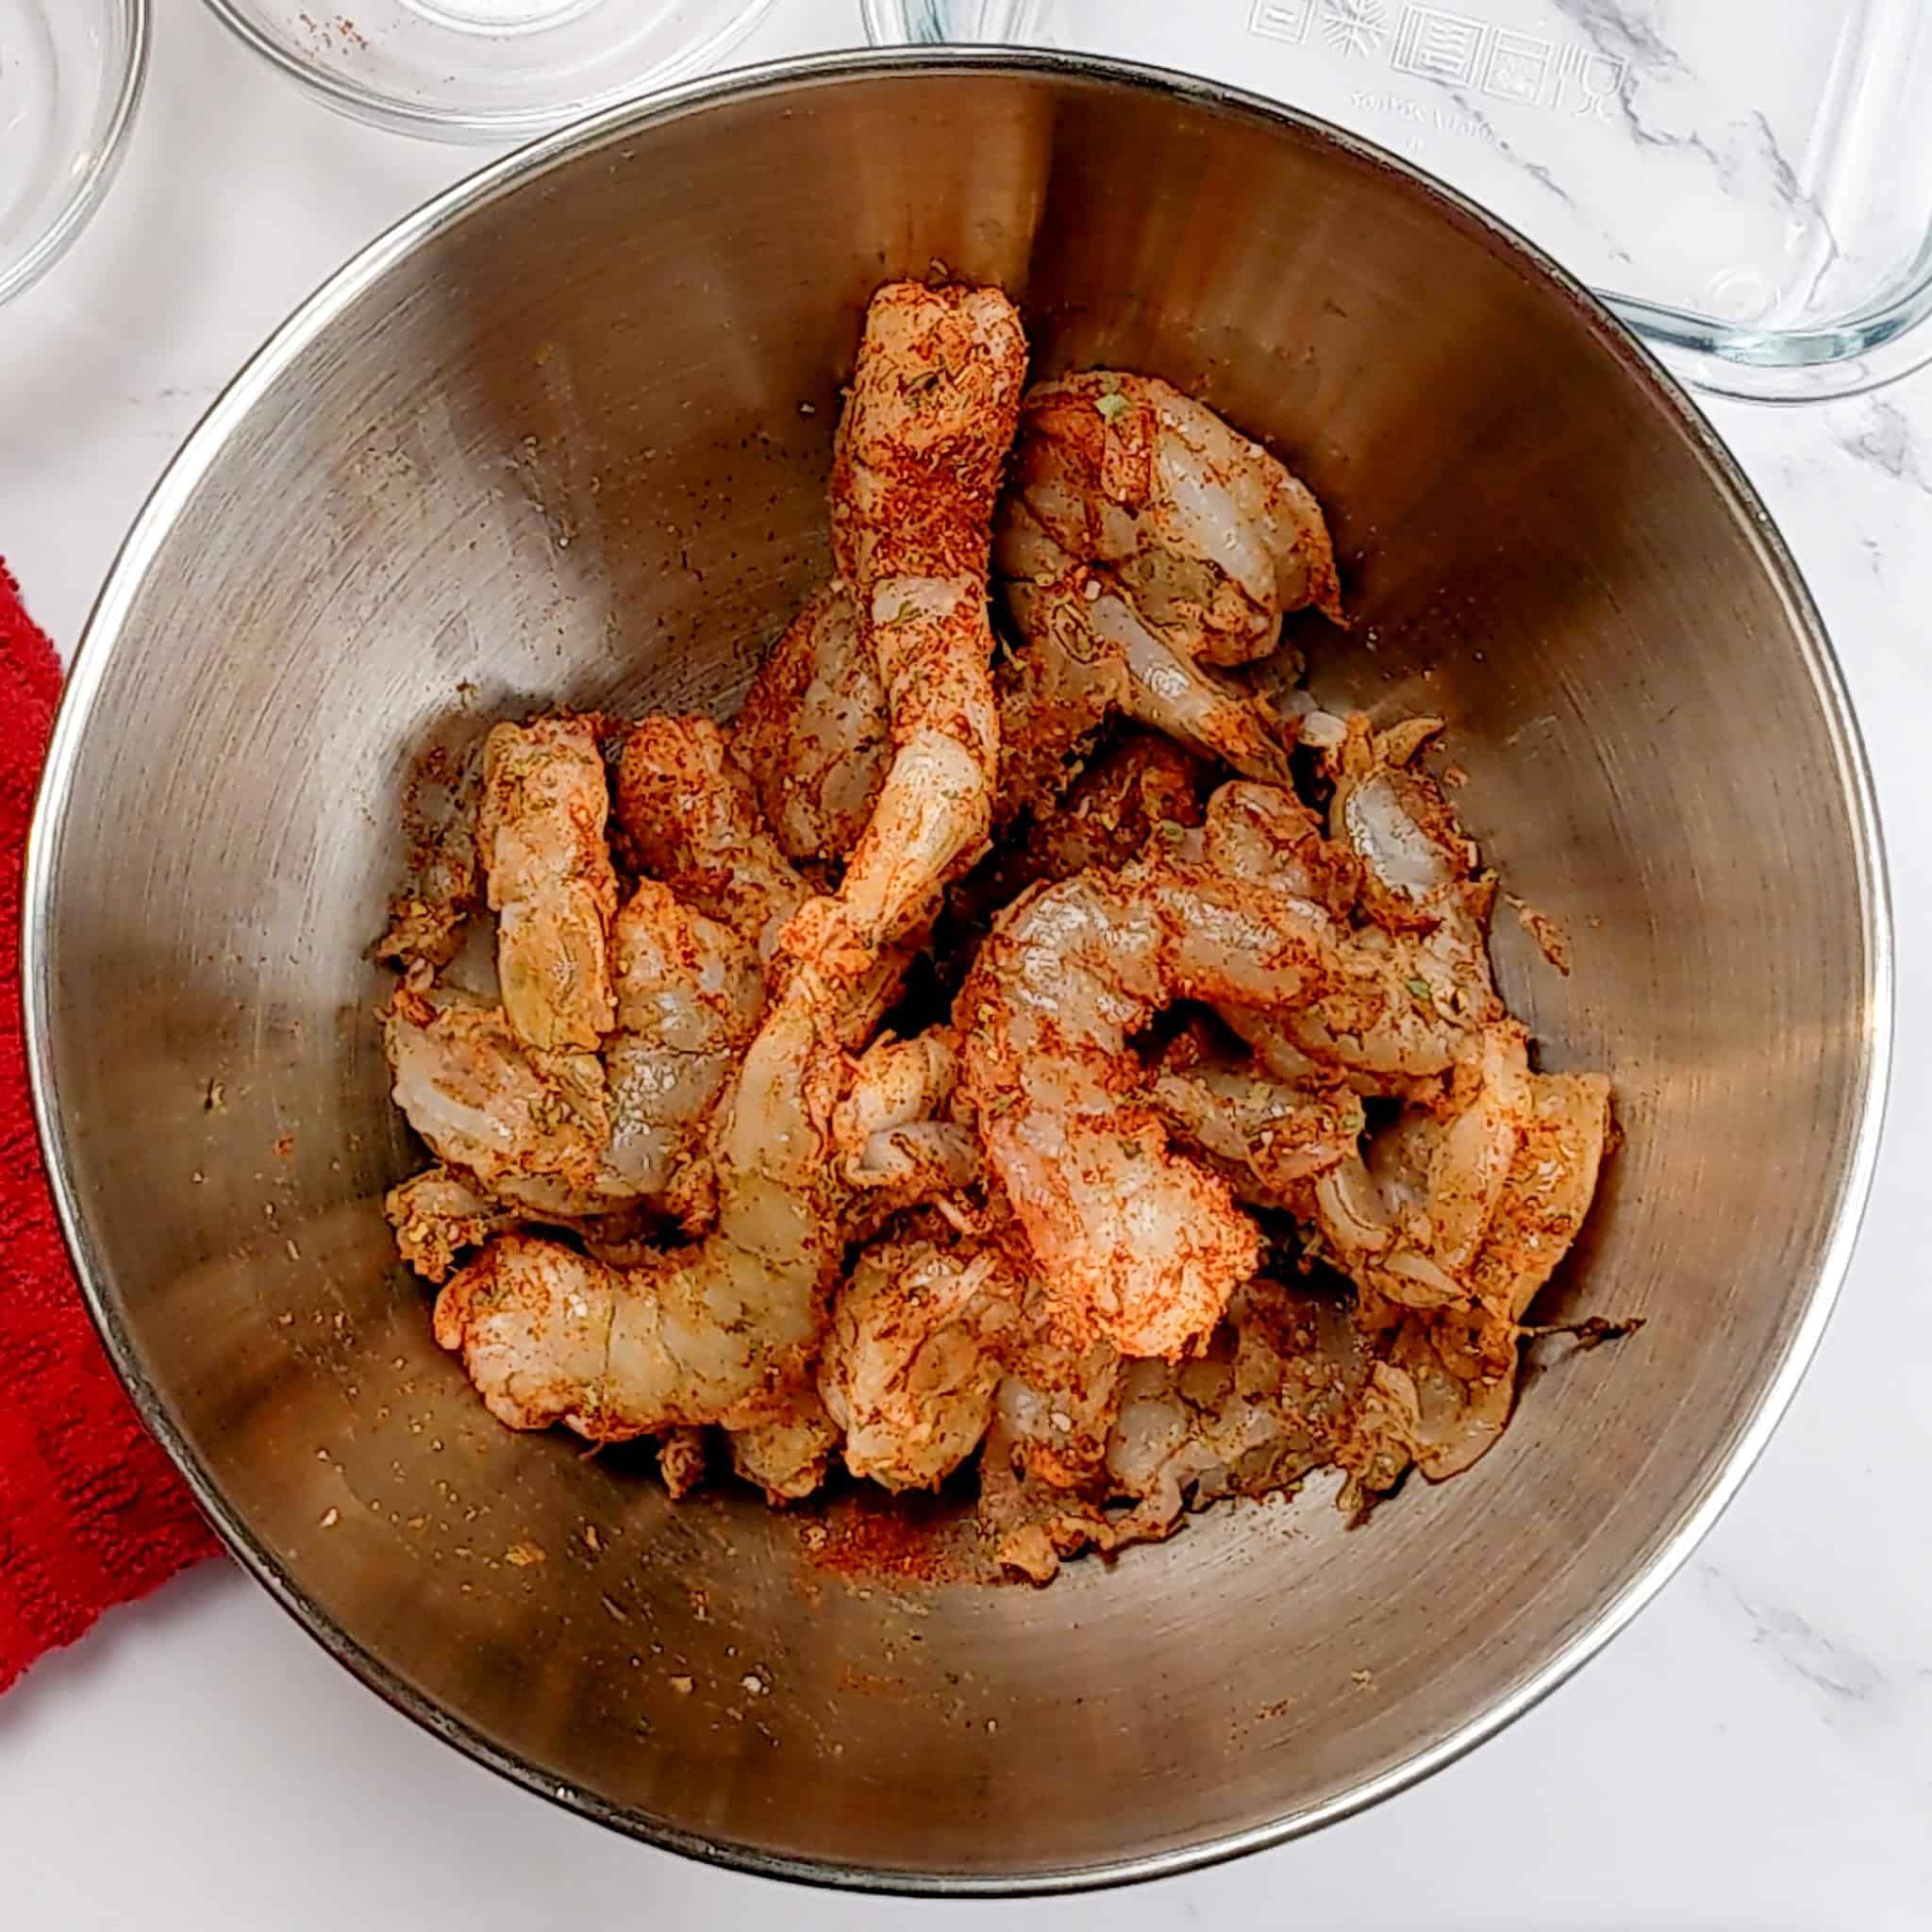 seasoned raw shrimp in a stainless steel mixing bowl.